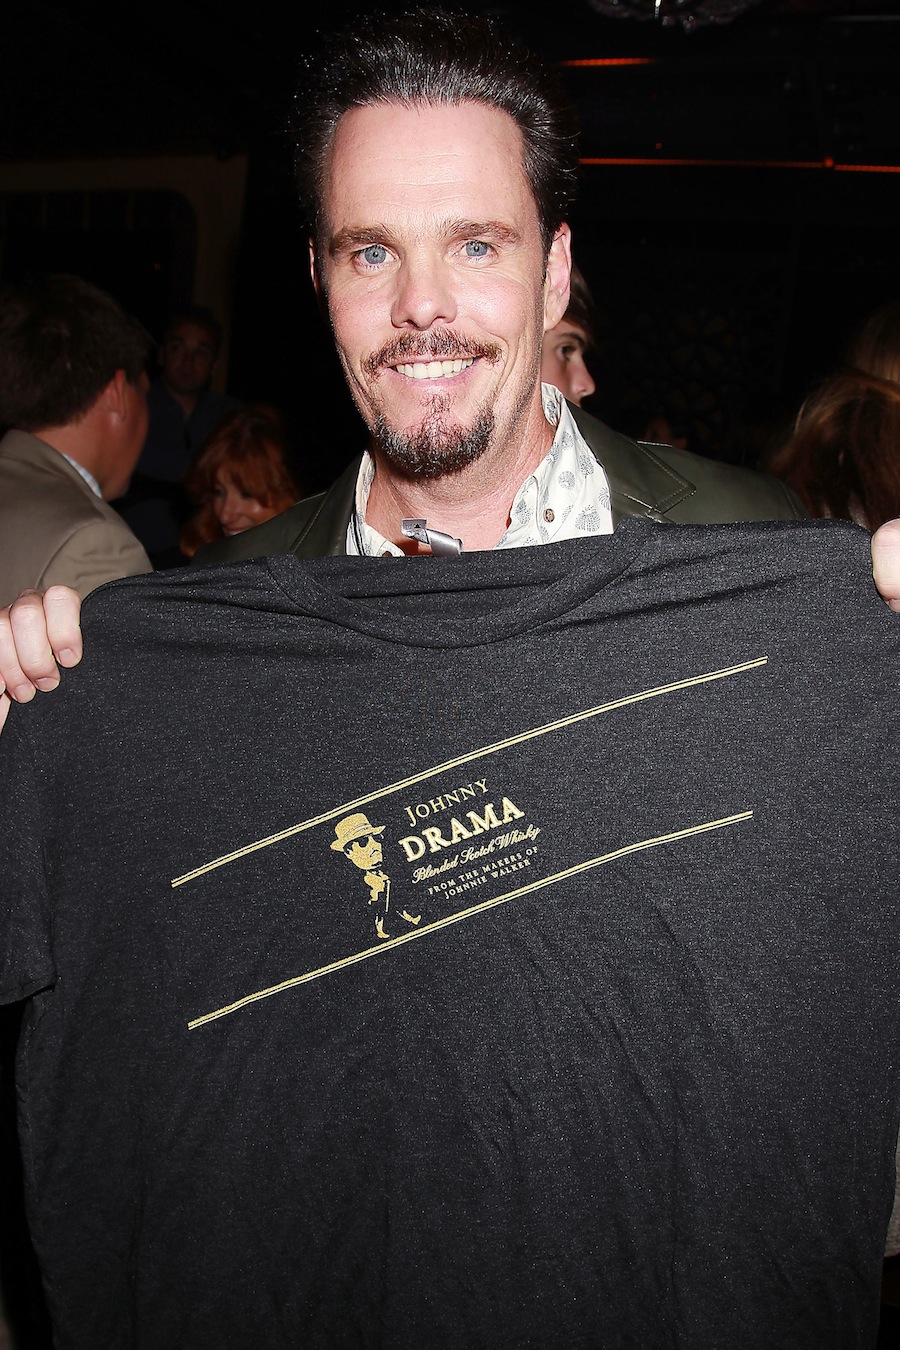 - New York, NY - 5/27/15 - After Party for a Special New York Screening of "Entourage" Presented by Johnny Walker Scotch Whisky. -PICTURED: Kevin Dillon -PHOTO by: Dave Allocca/Starpix  -Filename: DA_15_3540.JPG -Location: LAVO Startraks Photo New York,  NY For licensing please call 212-414-9464  or email sales@startraksphoto.com Startraks Photo reserves the right to pursue unauthorized users of this image. If you violate our intellectual property you may be liable for actual damages, loss of income, and profits you derive from the use of this image, and where appropriate, the cost of collection and/or statutory damages.